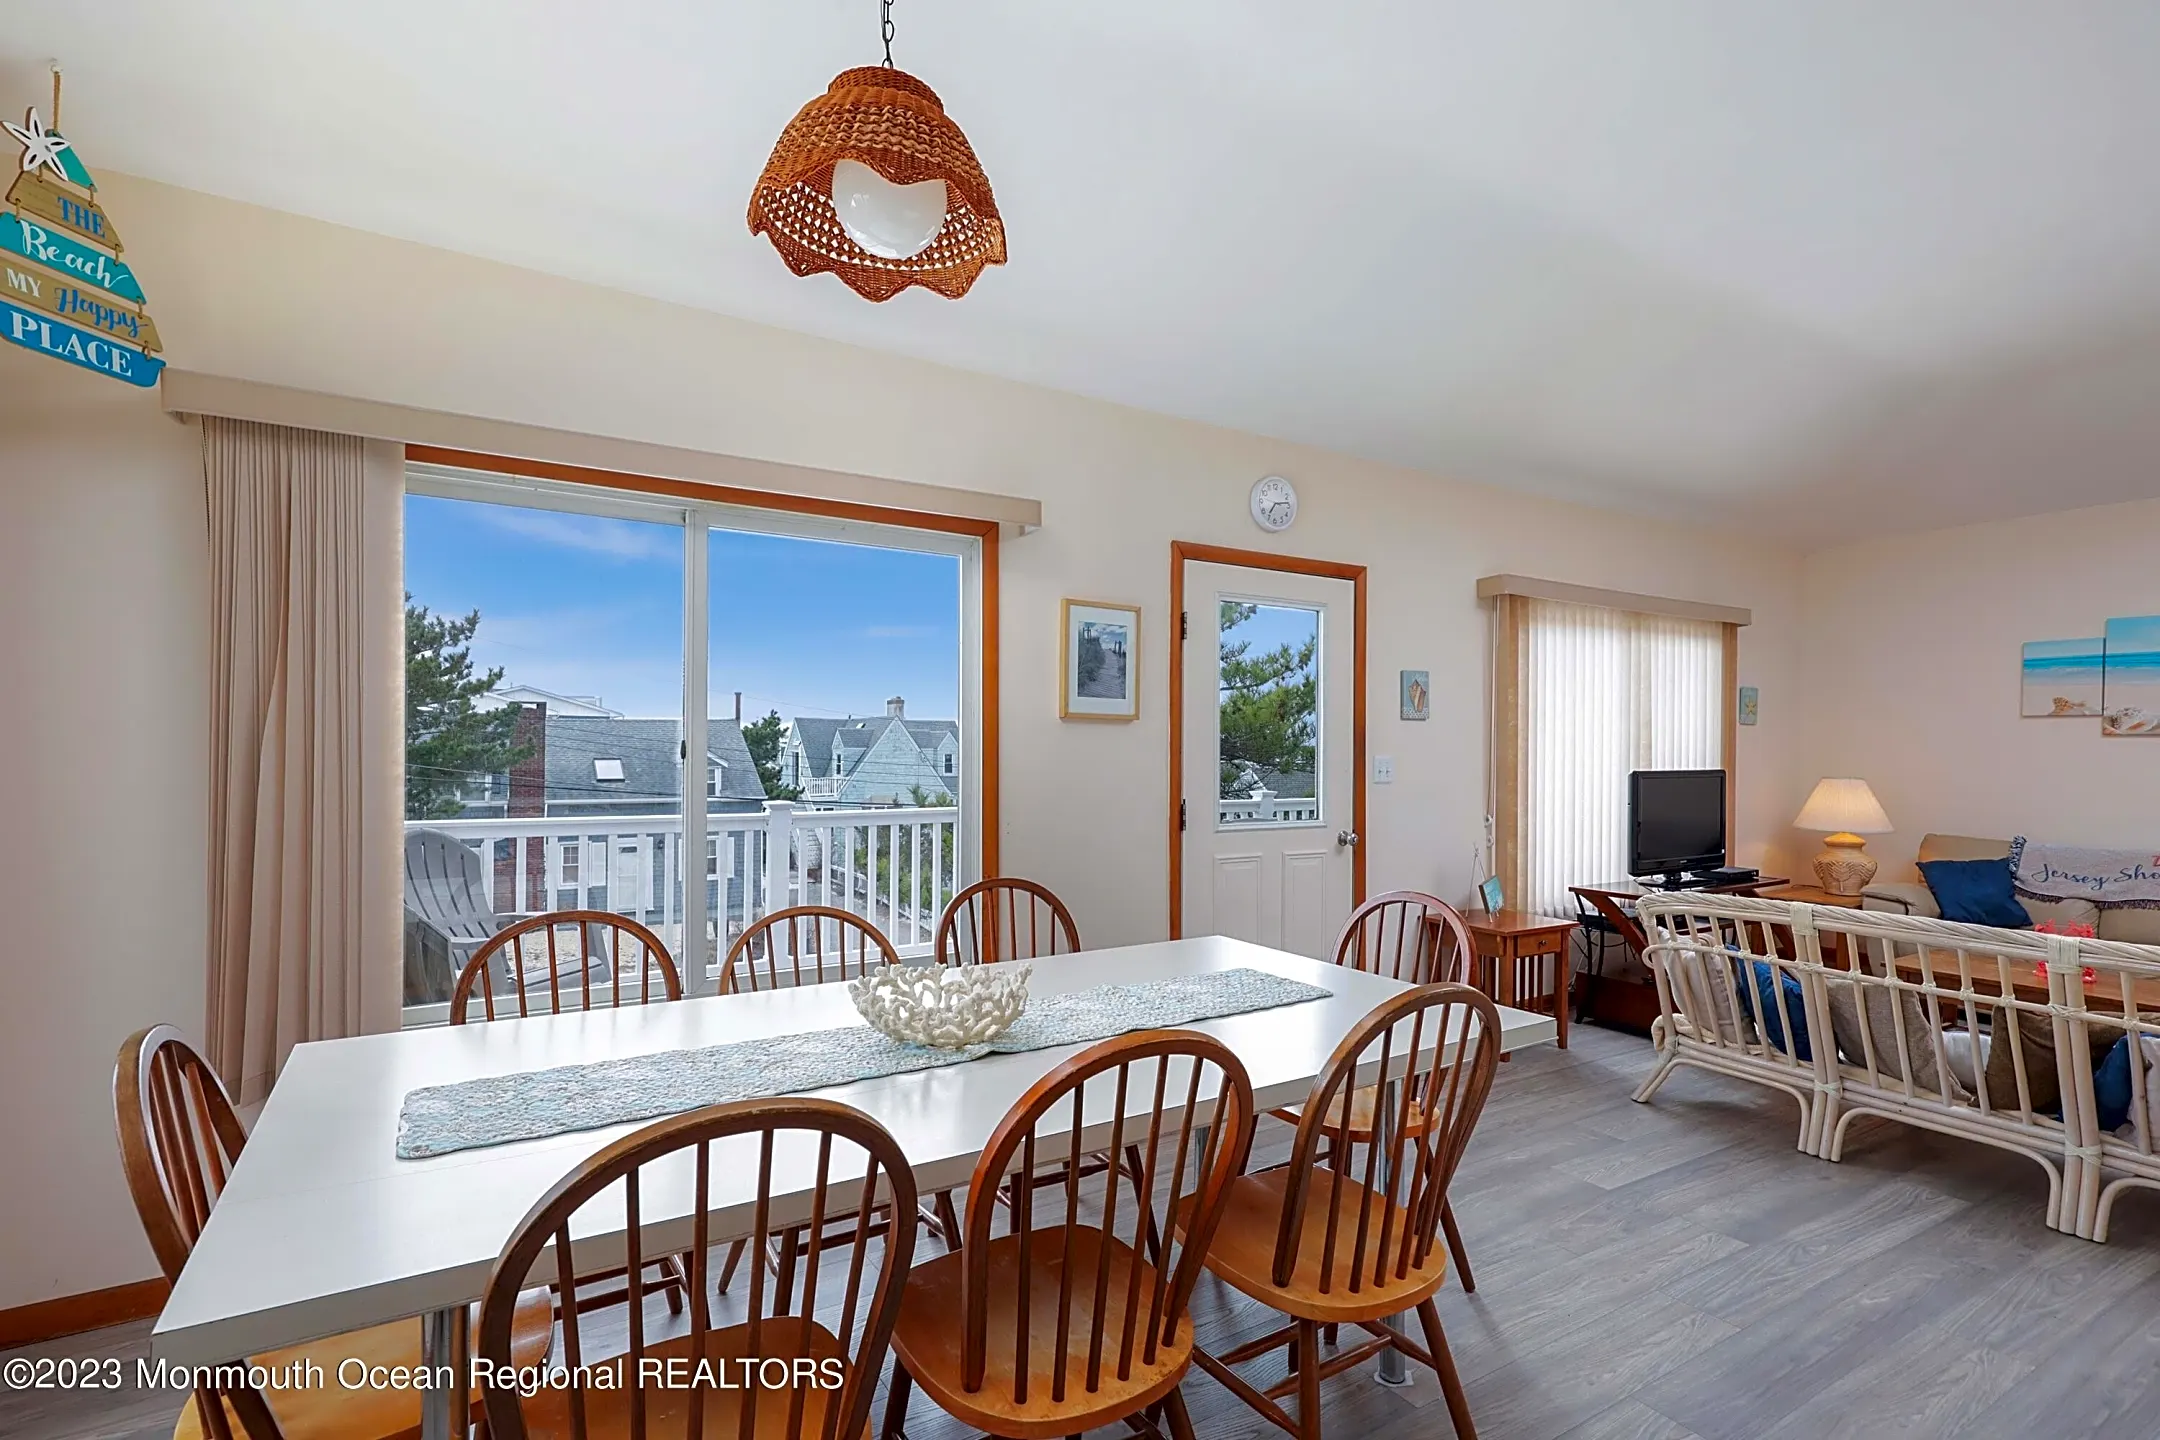 Dining Room - 1 New Jersey Ave #2 - Lavallette, NJ